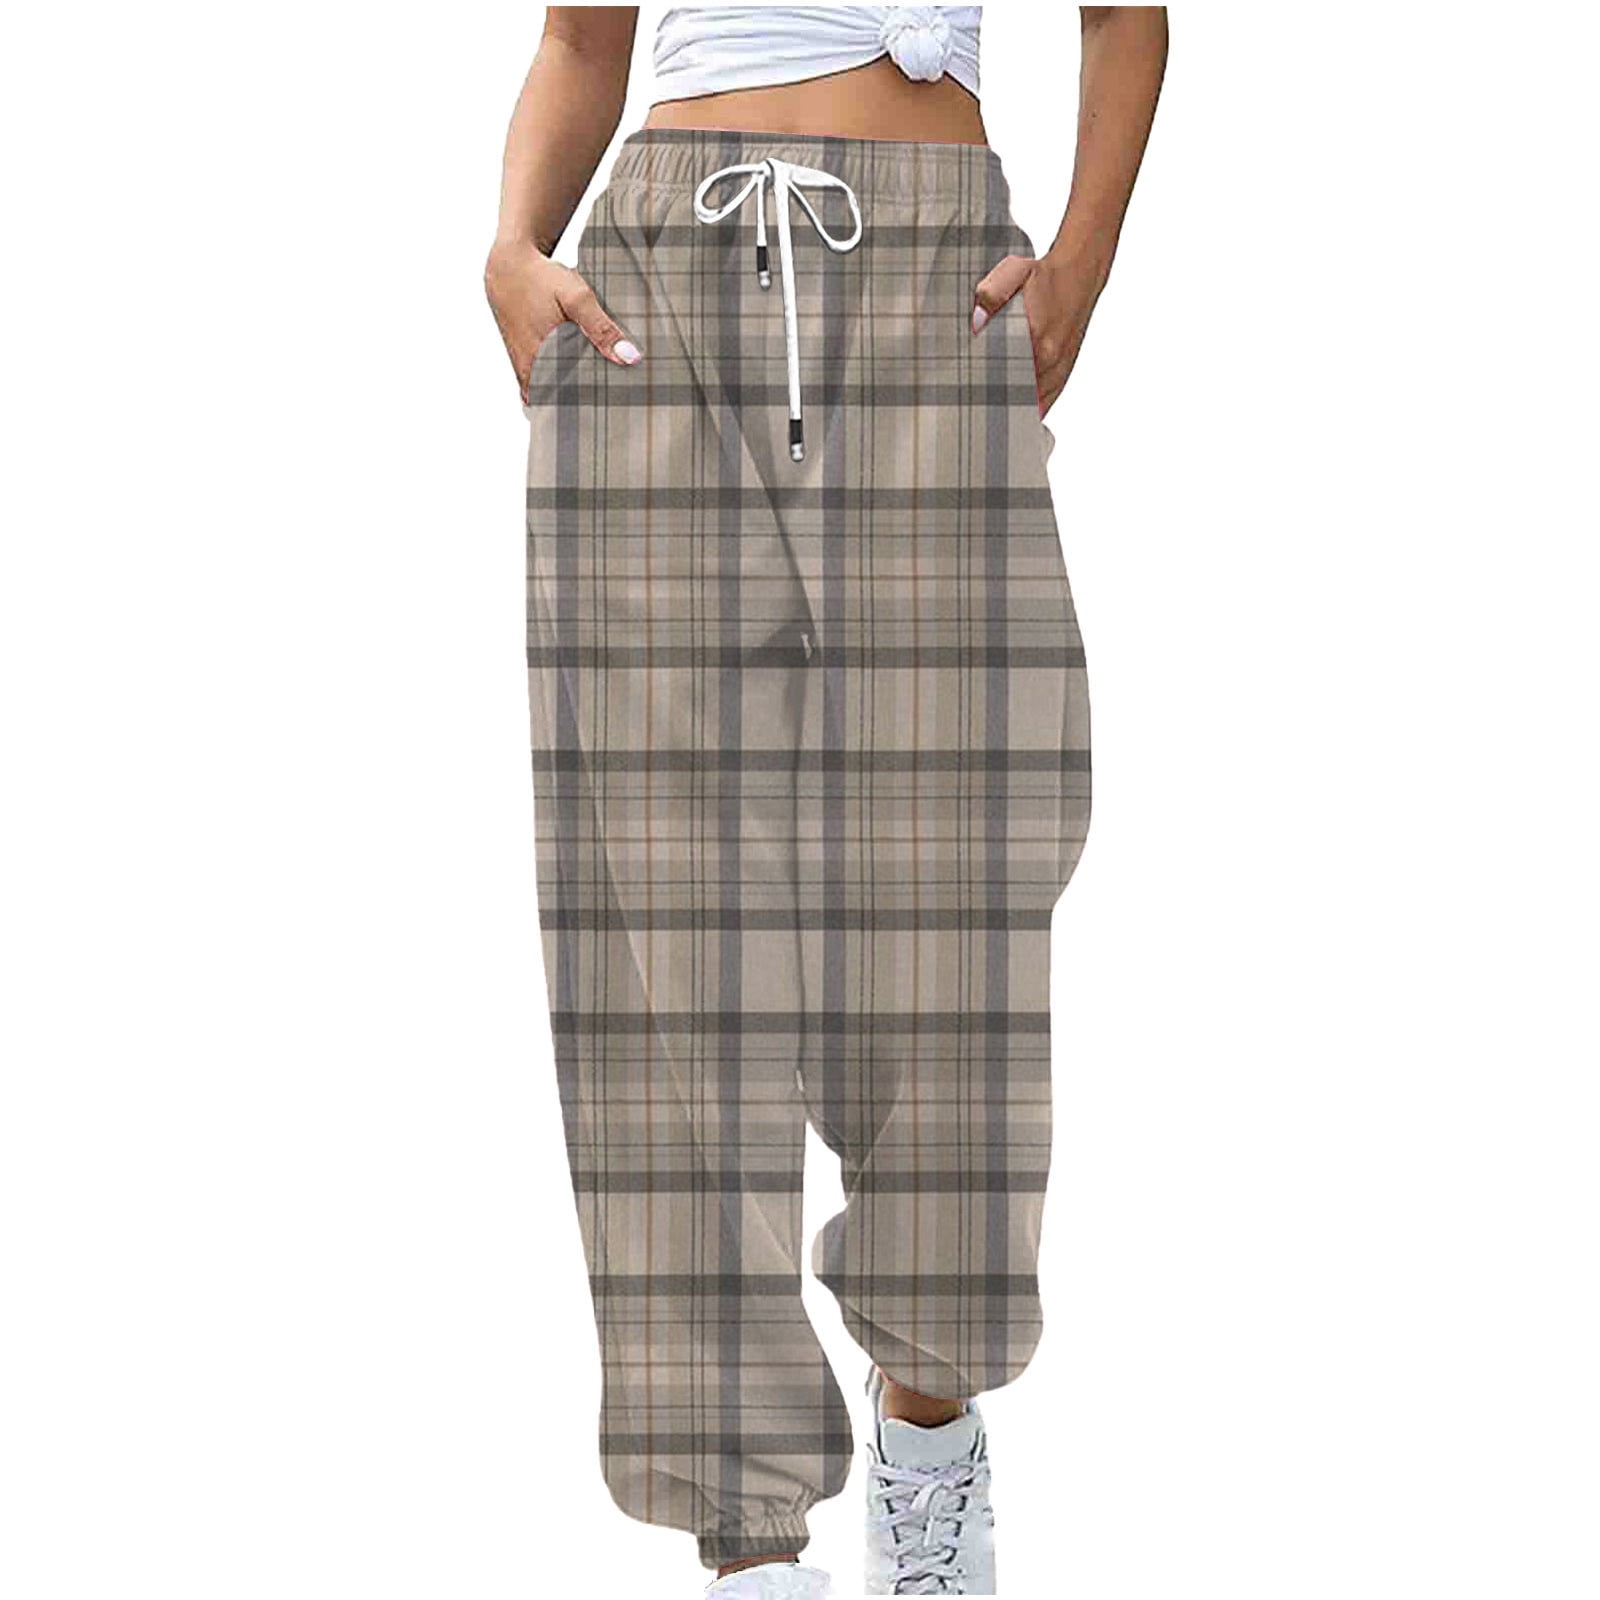 Frostluinai Cinch Bottom Sweatpants For Women With Pockets Cargo